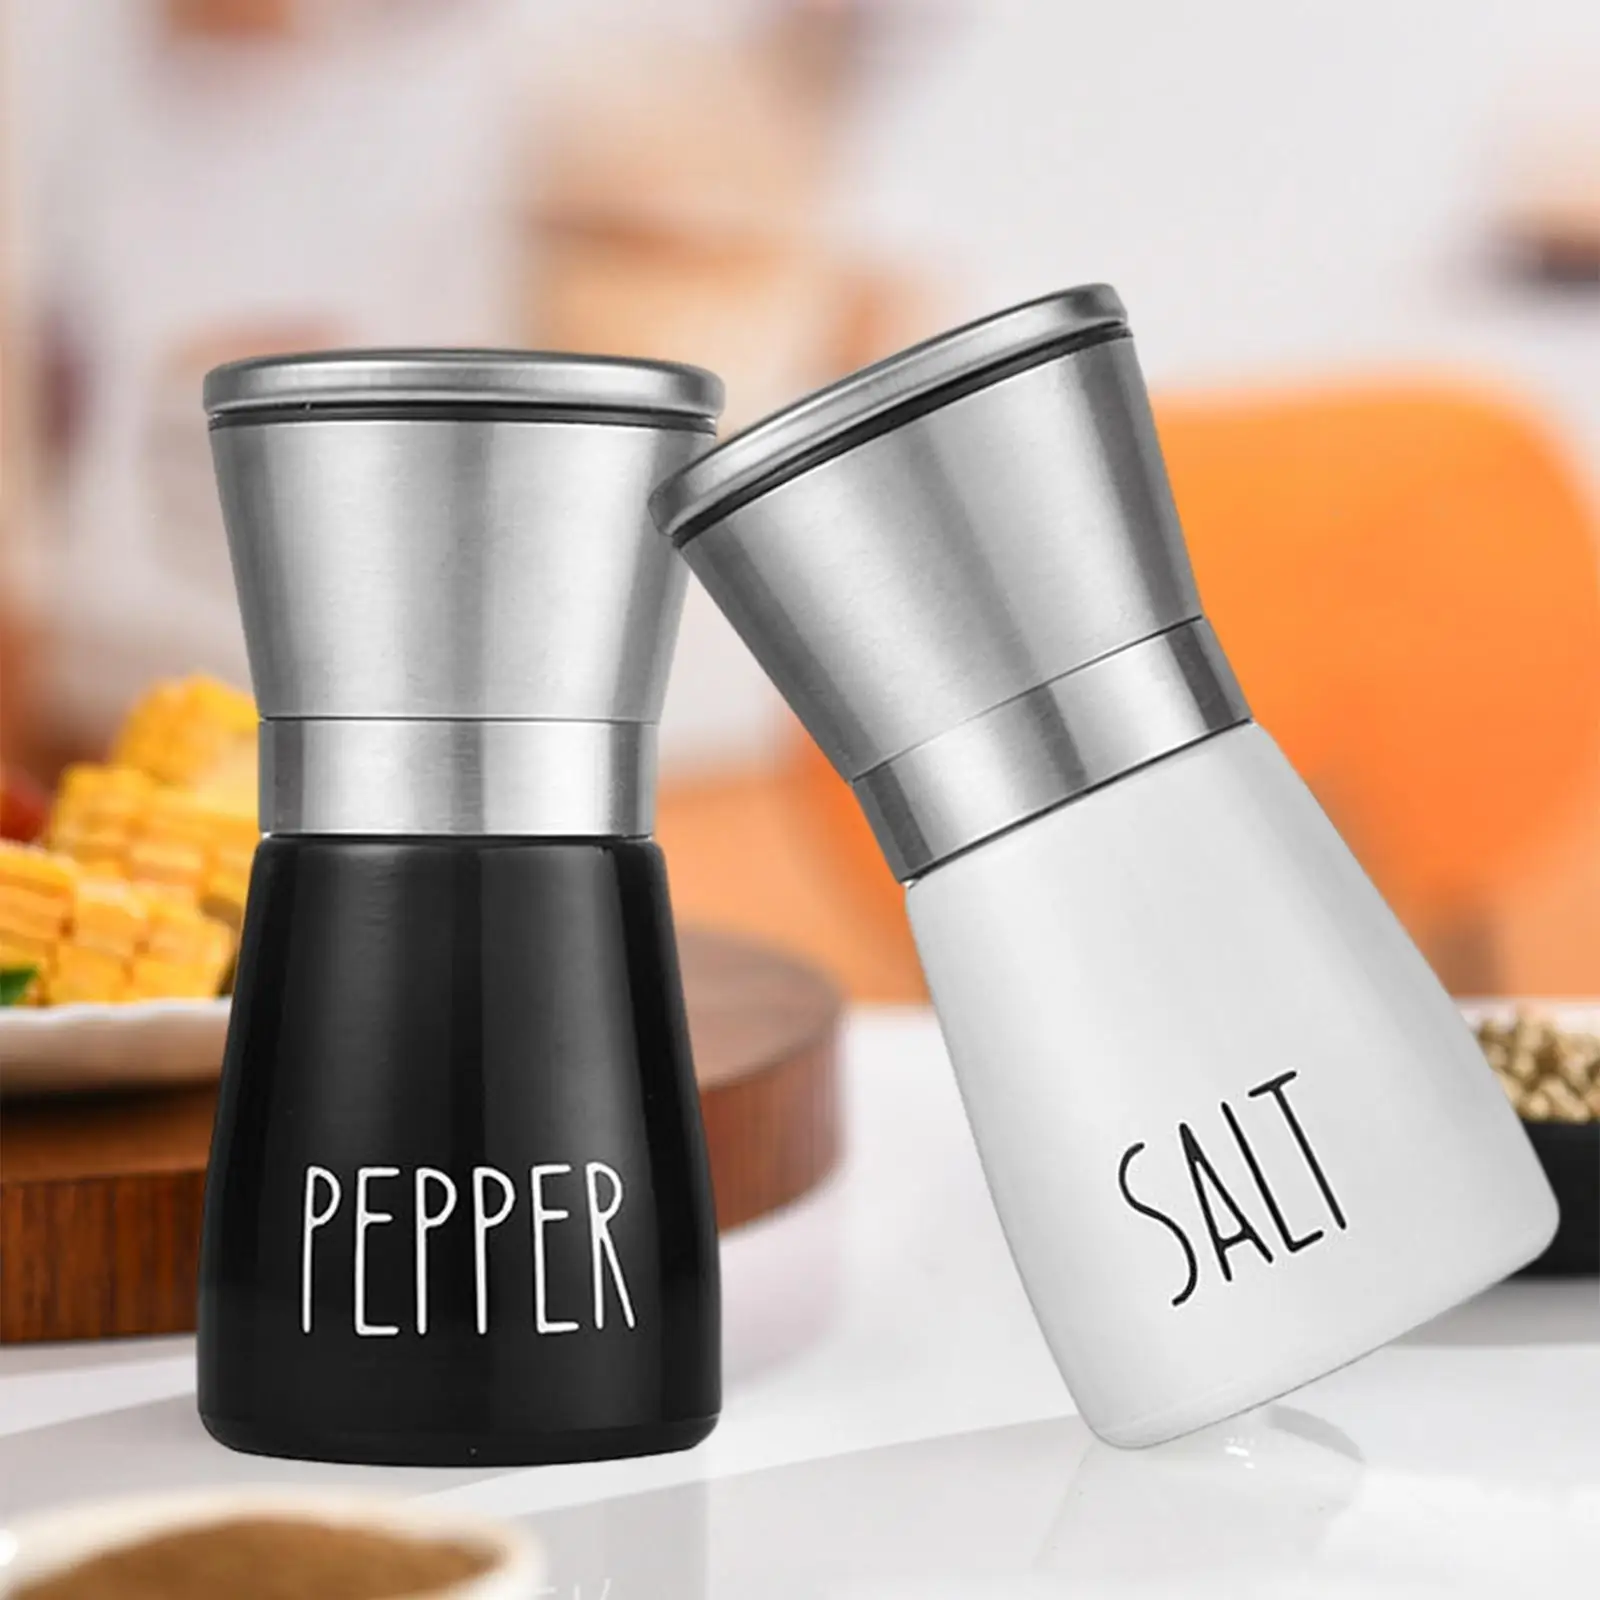 2 Pieces Refillable Salt Pepper Grinder Set, for Home Barbecue,Party and Every Meal Ceramic Blades with Dust Cover Kitchen Gift